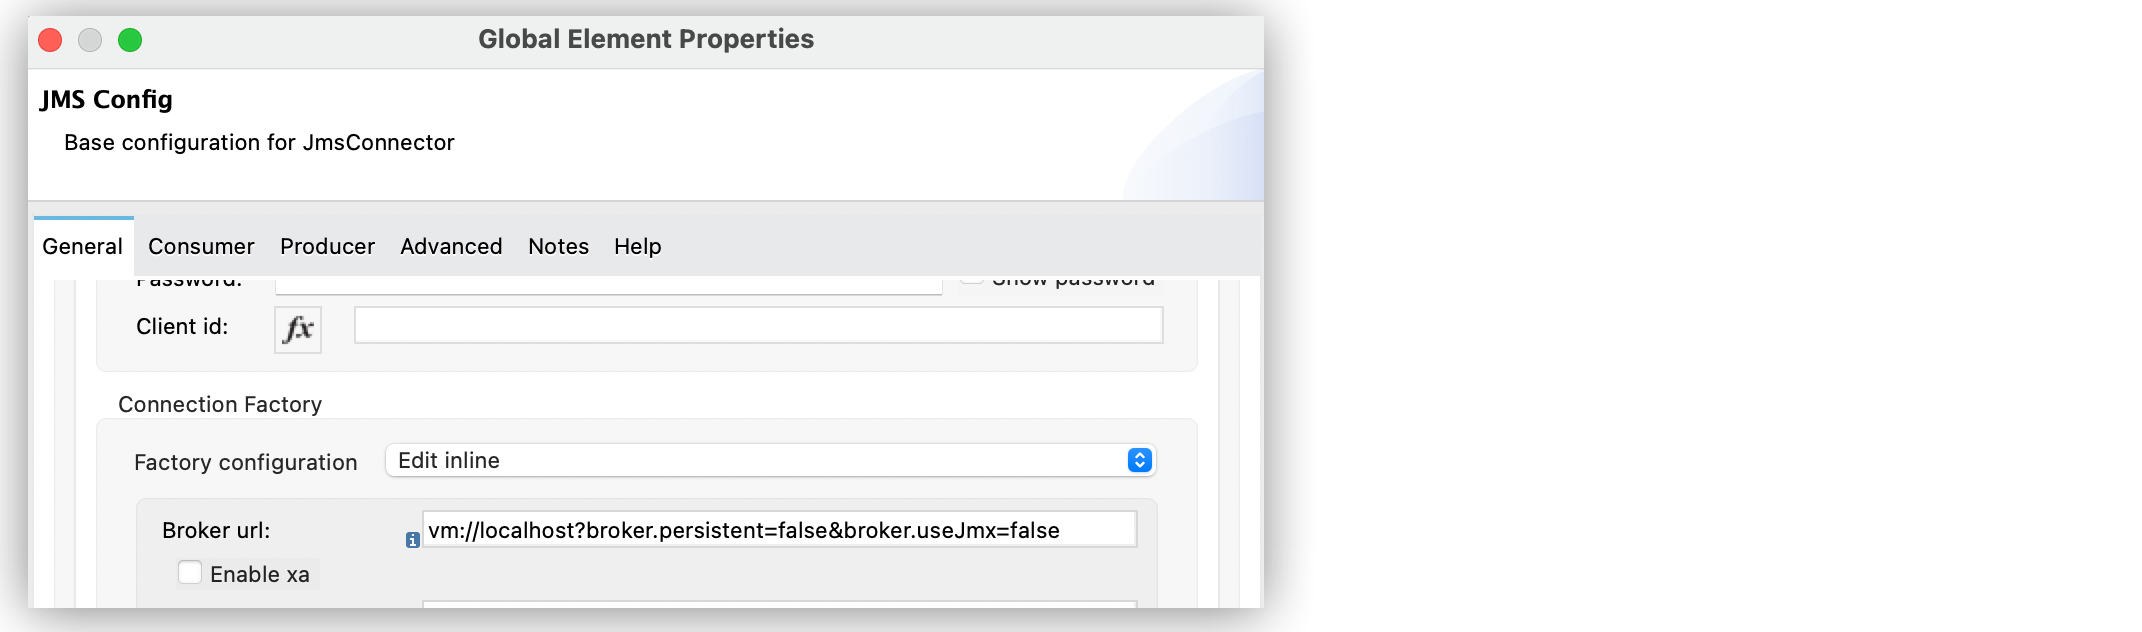 Set the Broker url field to the address of the broker to connect